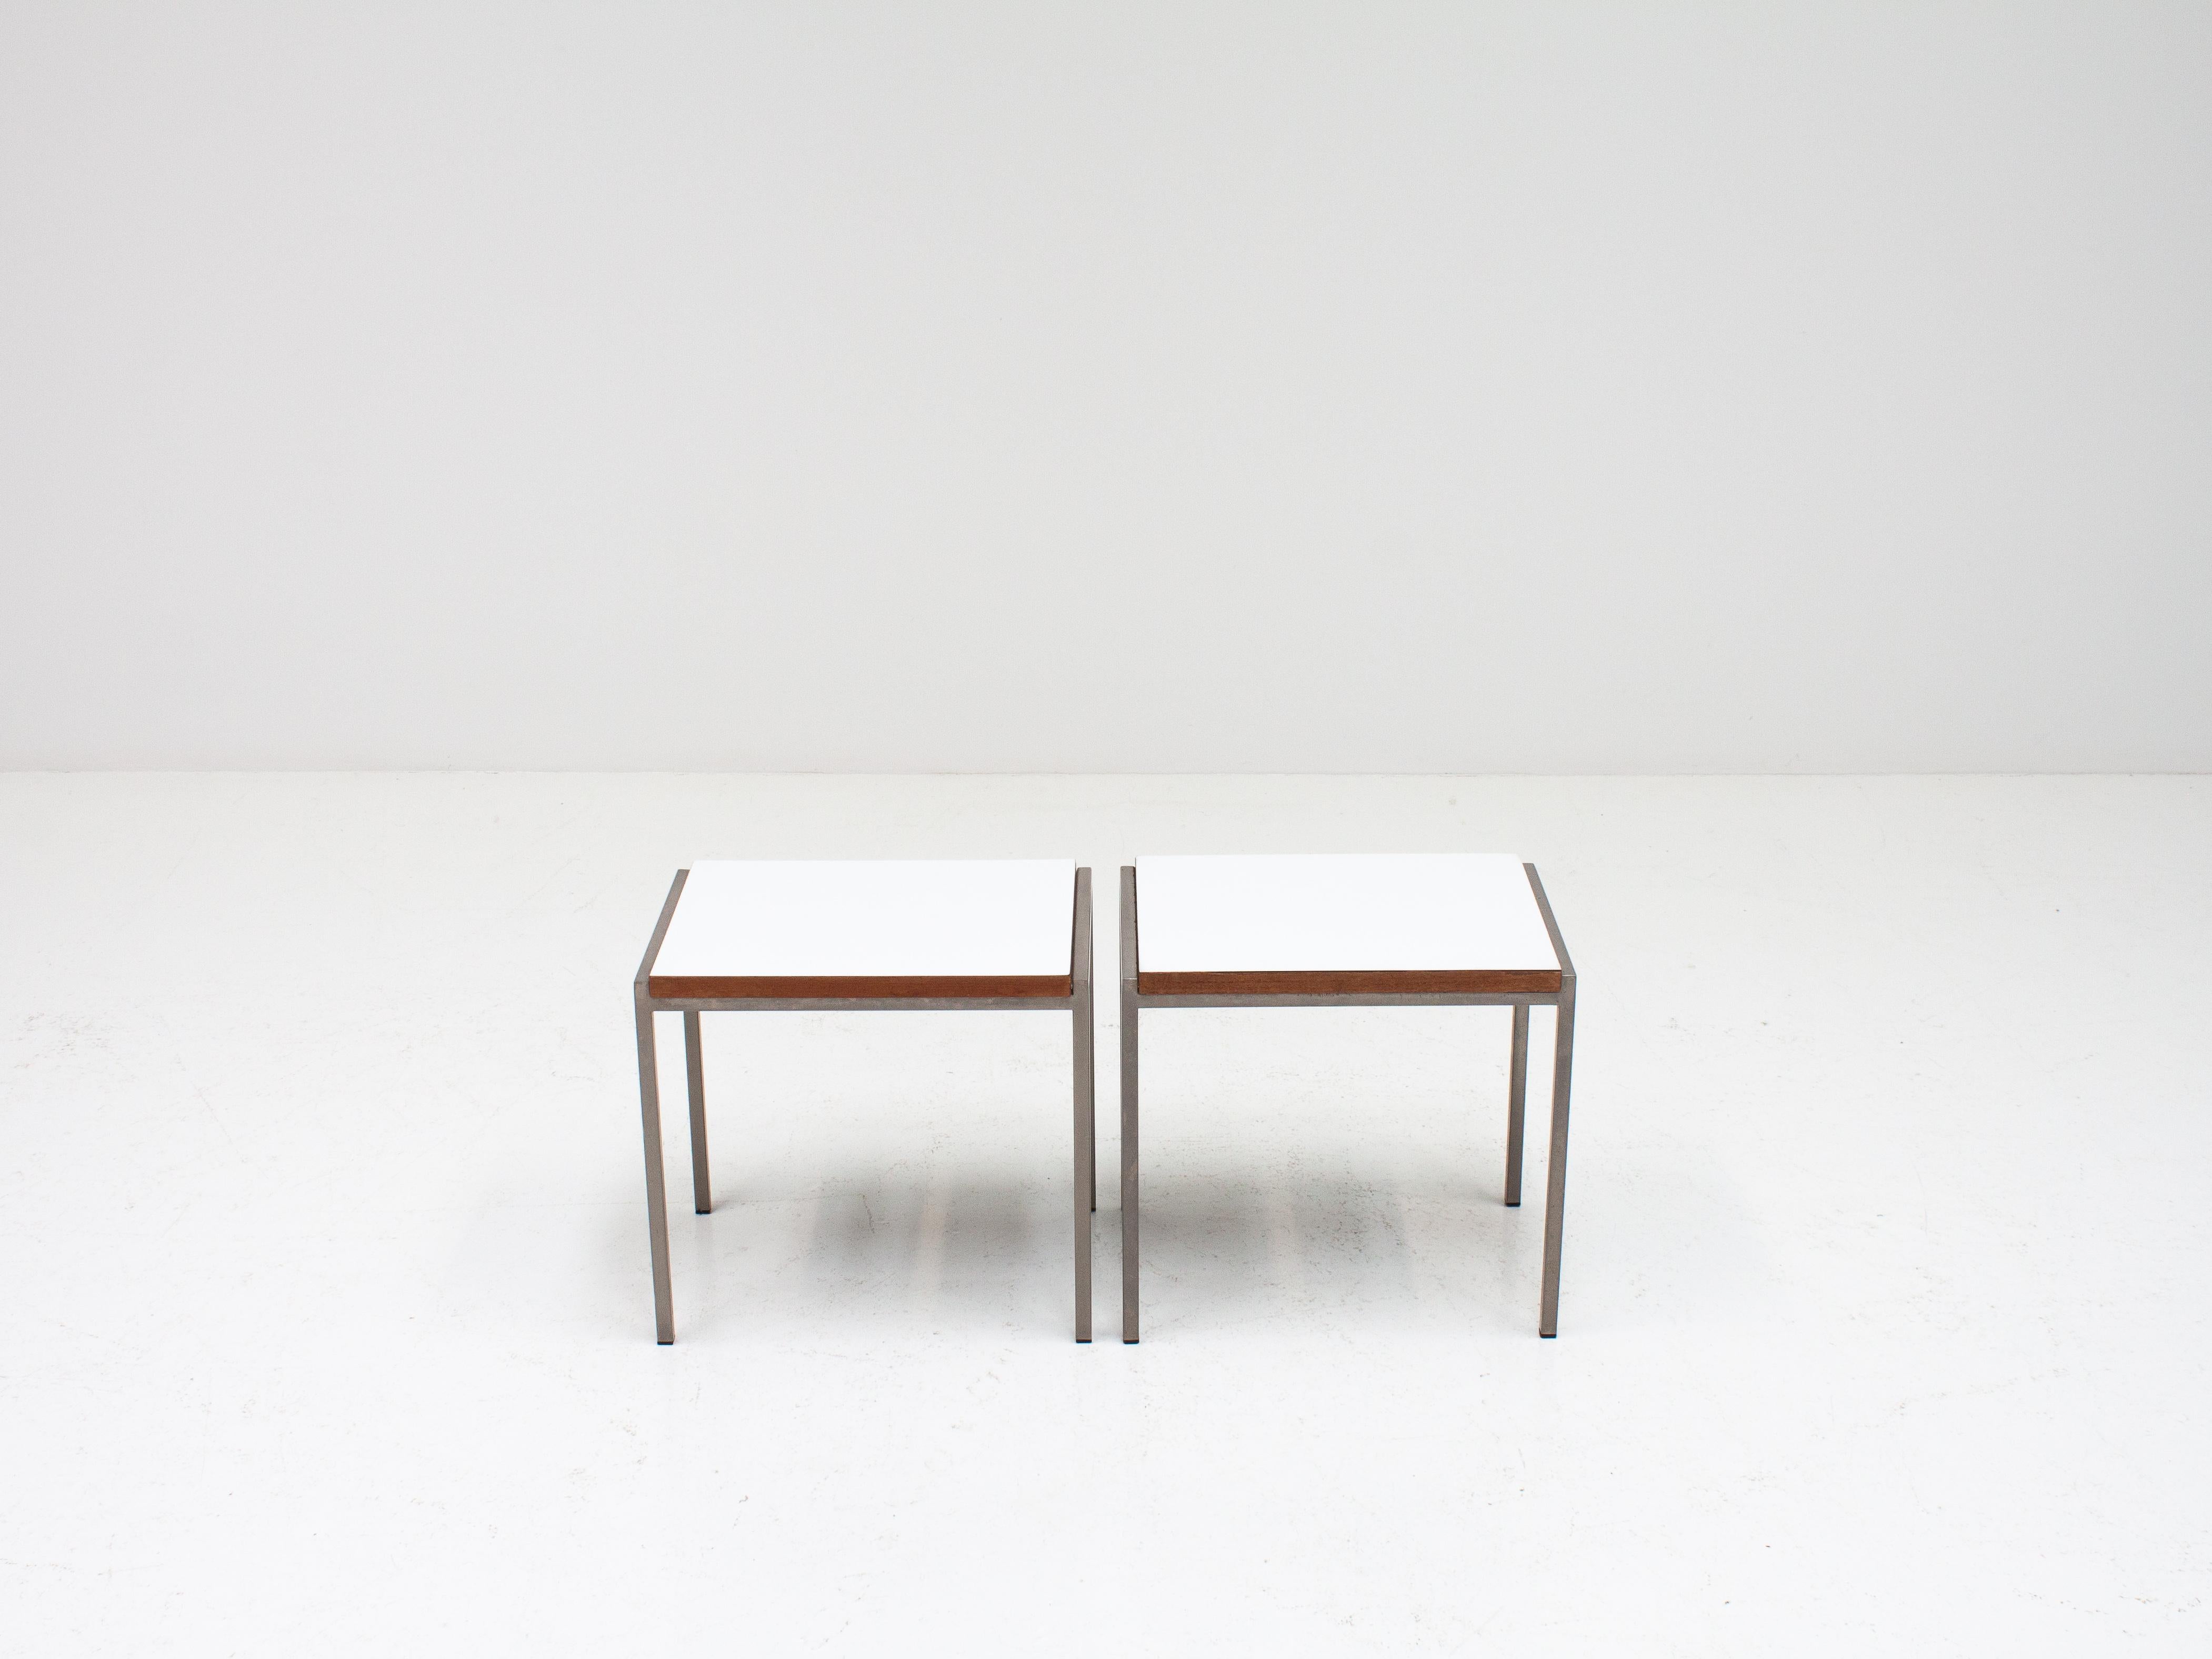 Dutch Pair of Cees Braakman Side Tables From The 'Japanese series' For UMS Pastoe